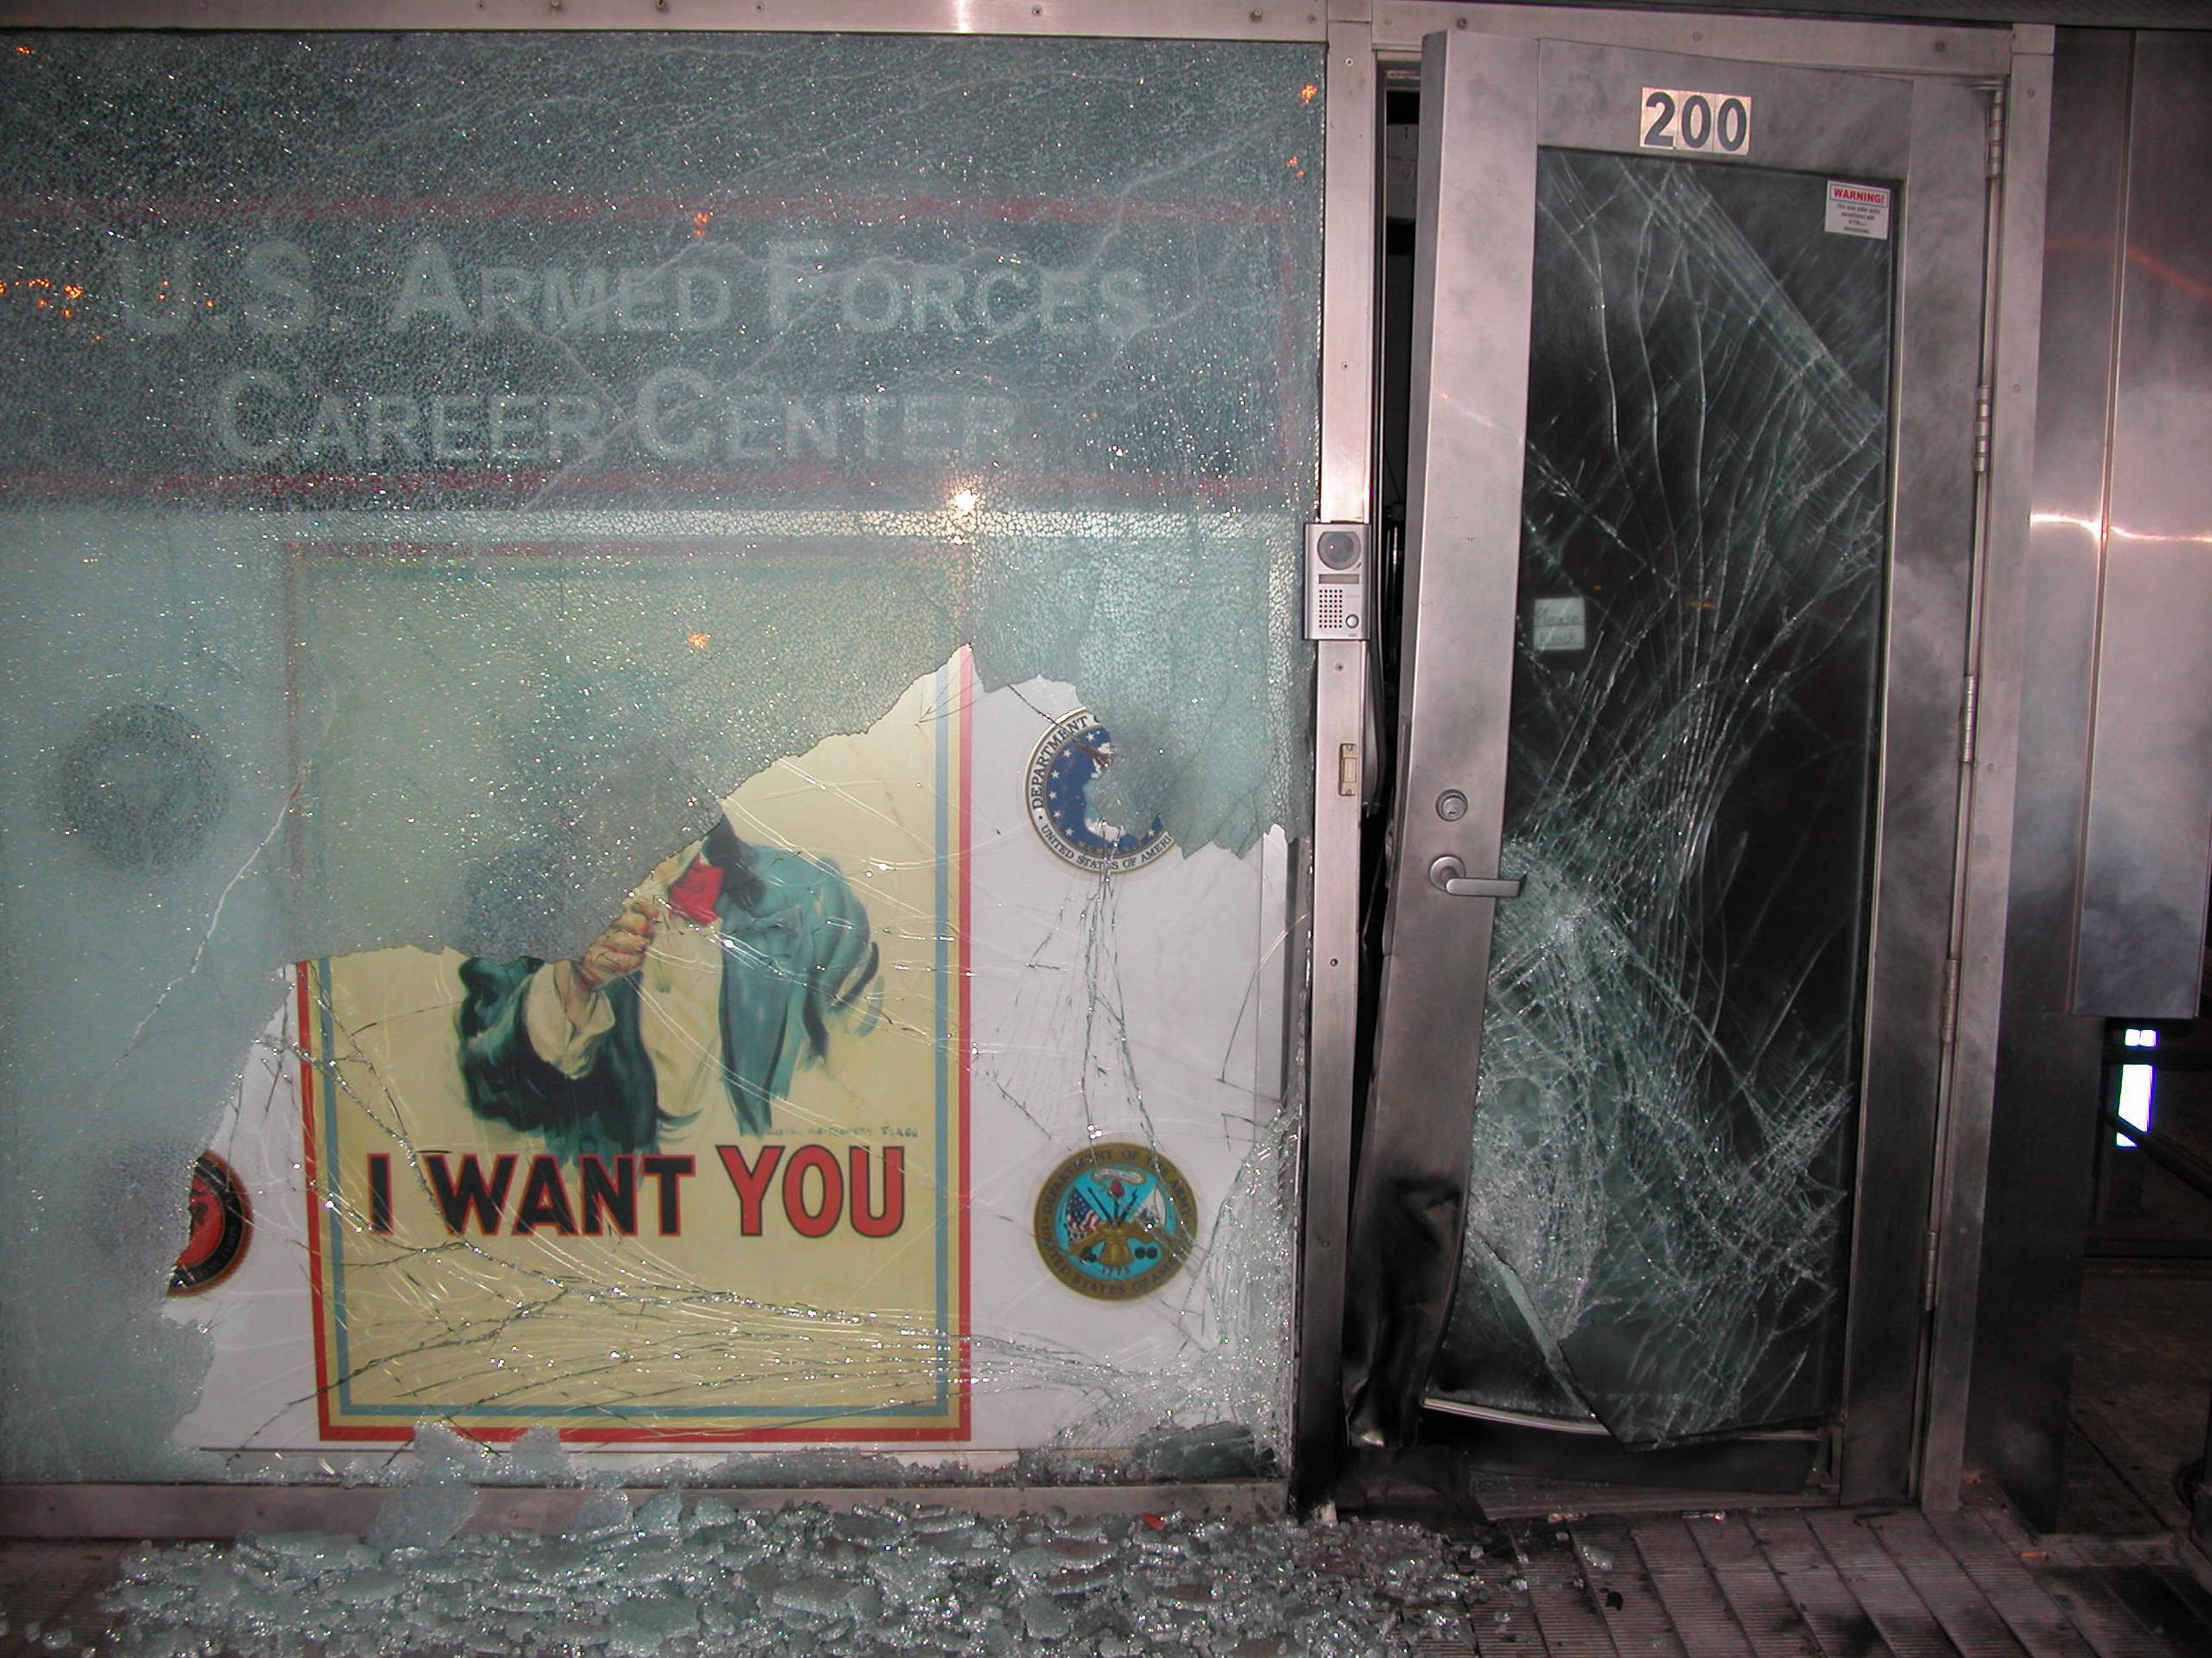 Damage caused in the unsolved March 6, 2008 bombing of the United States Armed Forces Recruiting Station in Times Square. See https://www.fbi.gov/contact-us/field-offices/newyork/news/press-releases/more-than-100-000-being-offered-for-information-in-unsolved-2008-times-square-bombing for more details.